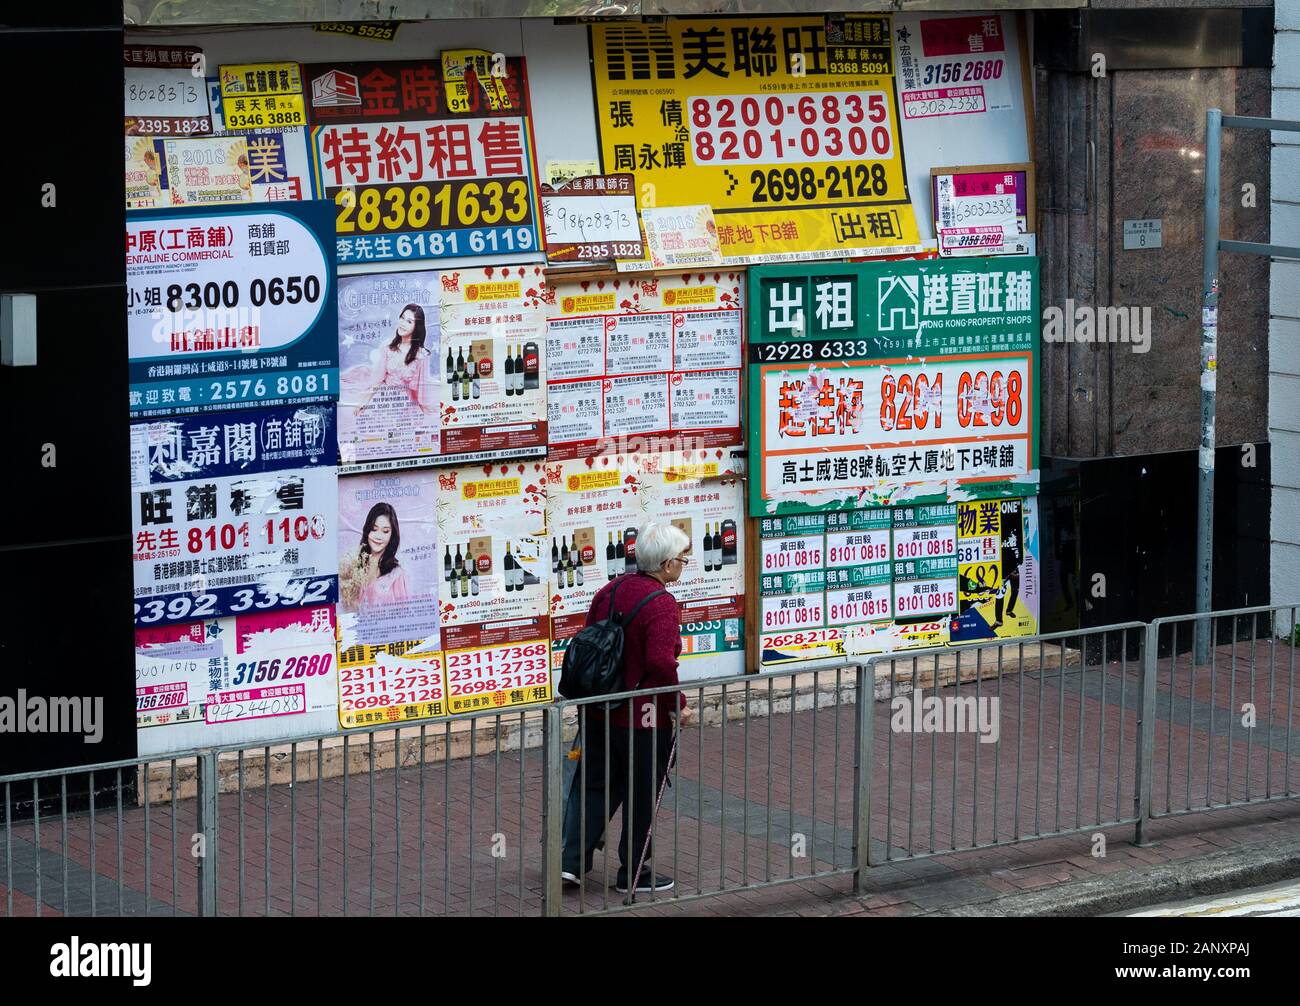 A recently closed shop front is plastered with estate agent advertisements in Wan Chai Hong Kong. Businesses in Hong Kong suffer regularly being force Stock Photo